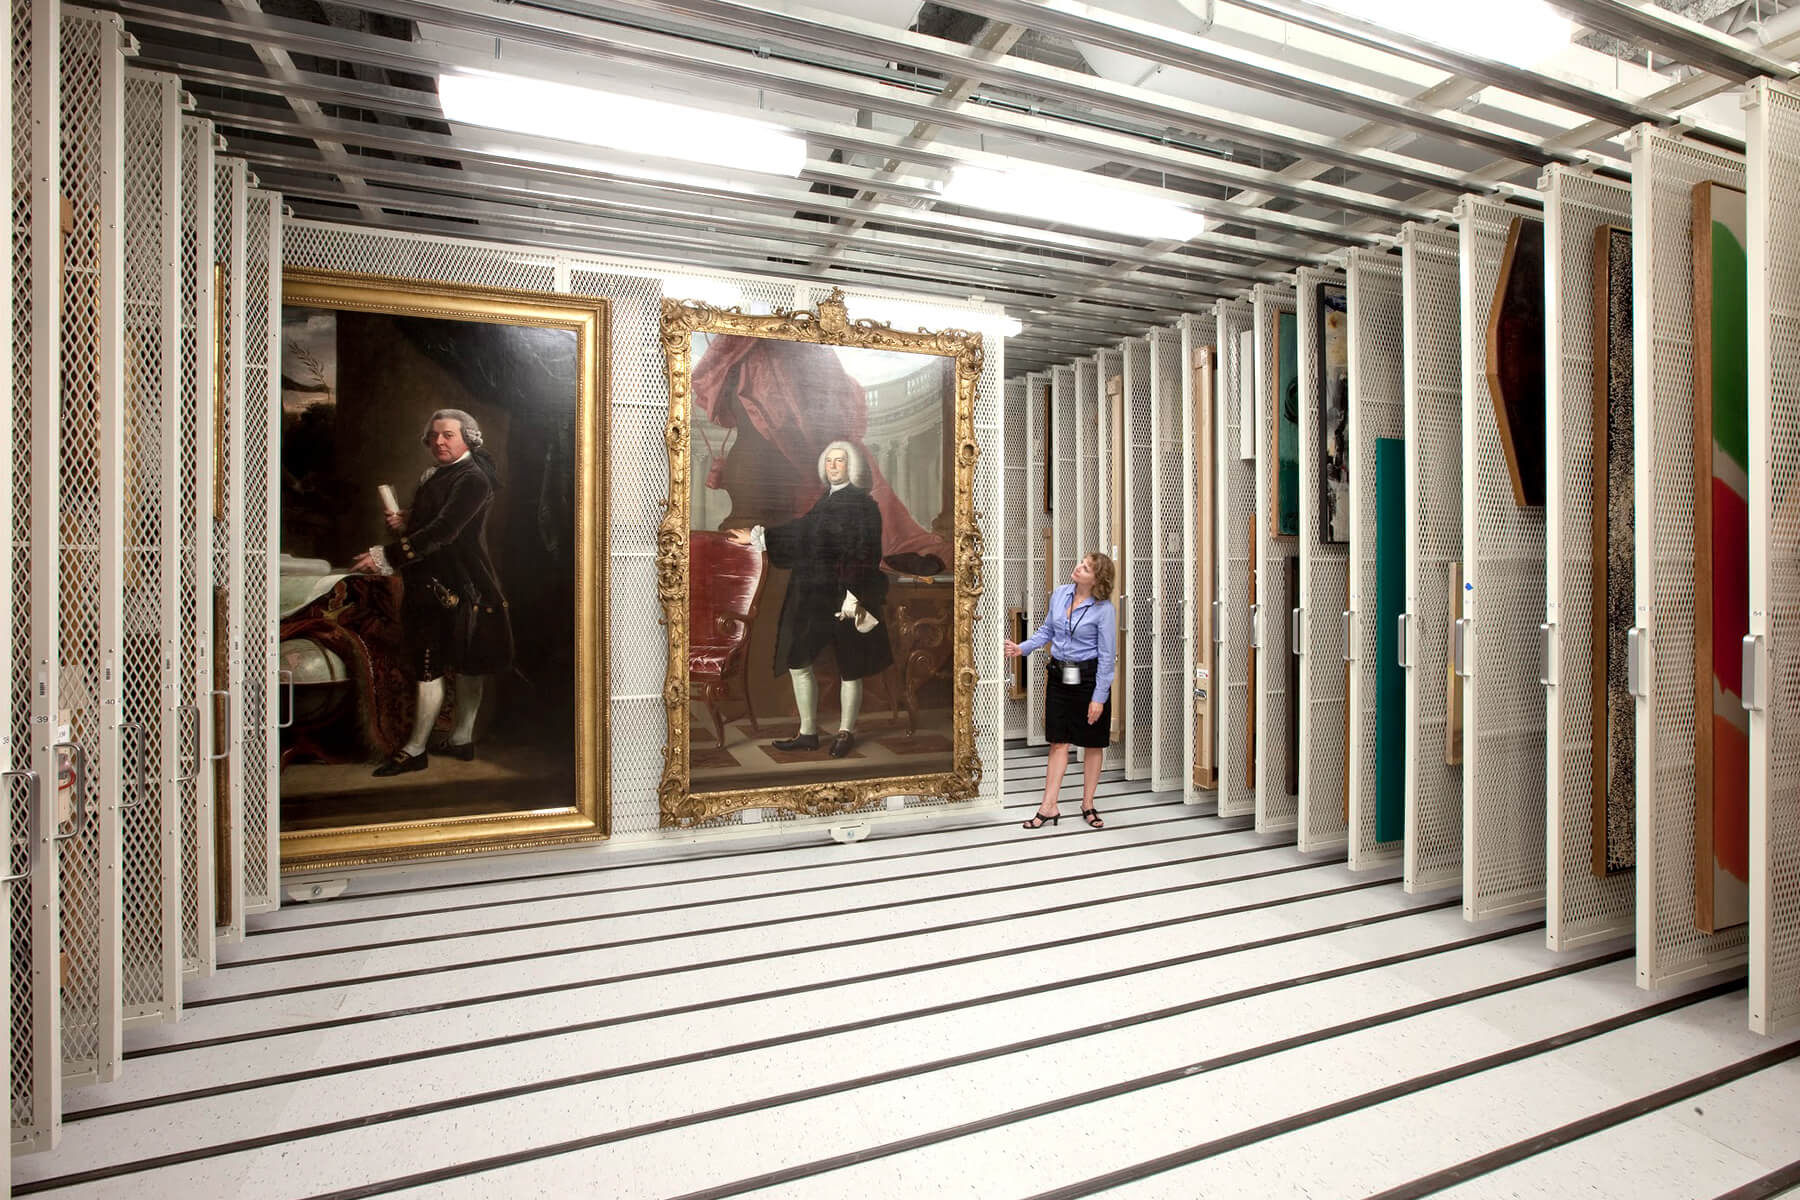 Choosing Art Storage Racks, Cabinets and Other Museum Storage Systems